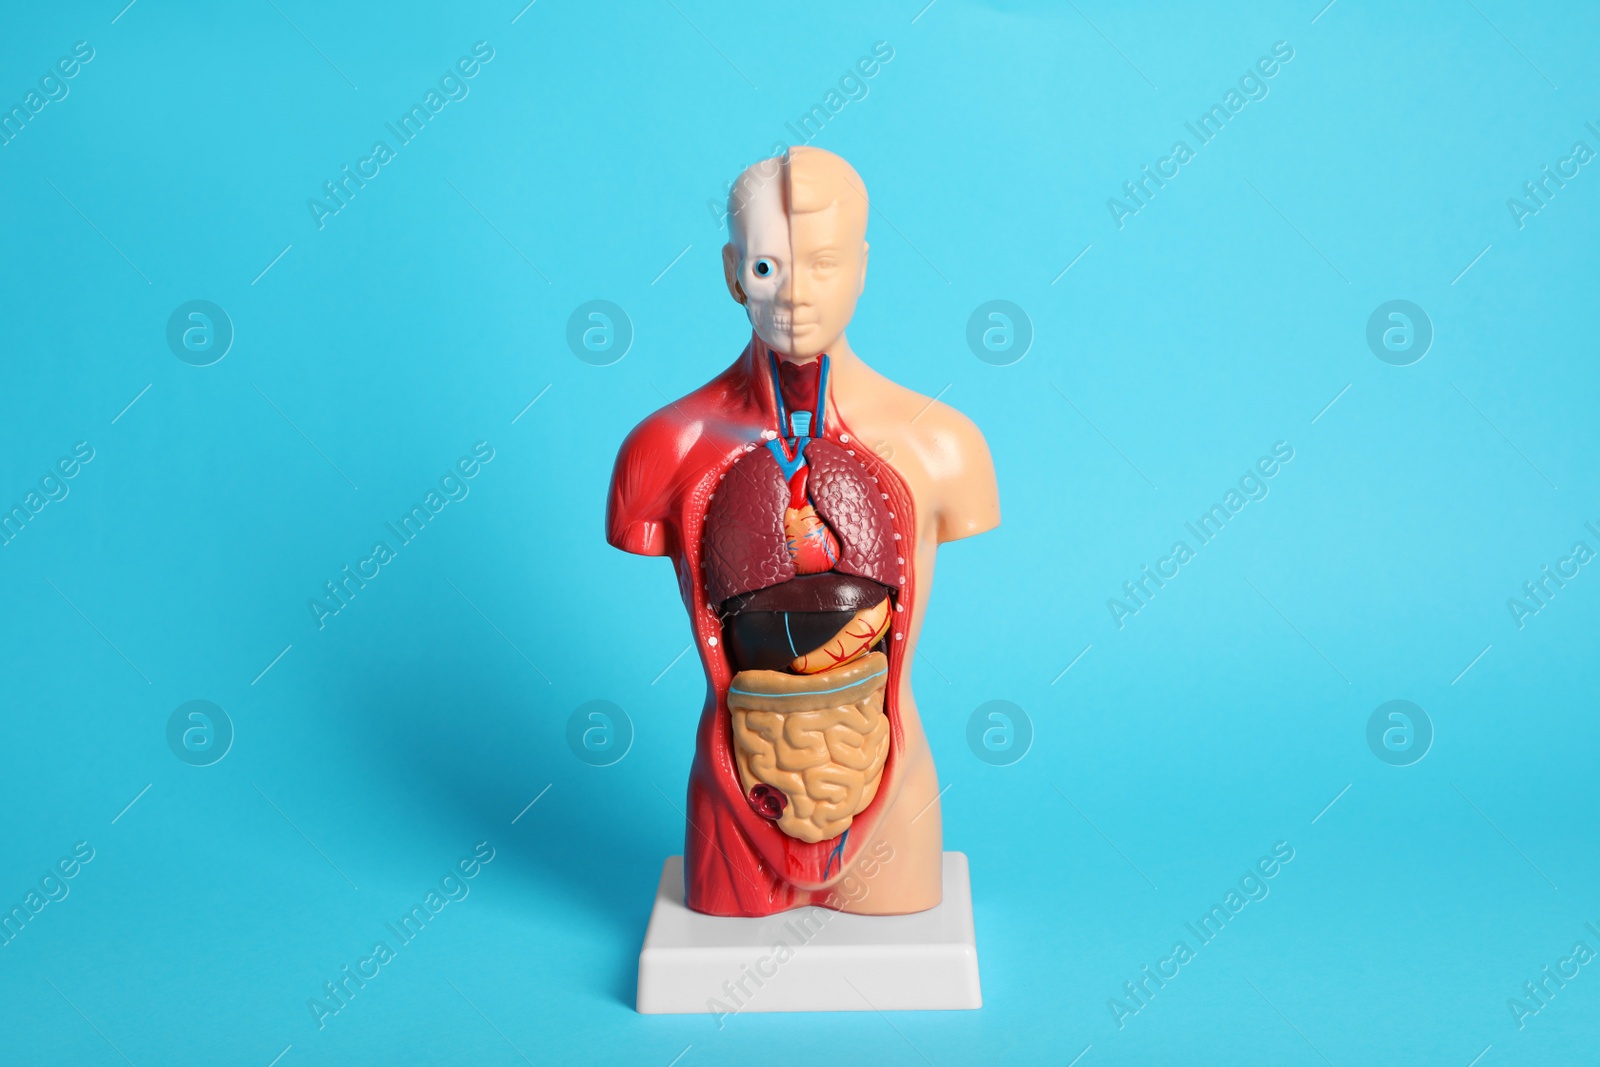 Photo of Human anatomy mannequin showing internal organs on light blue background